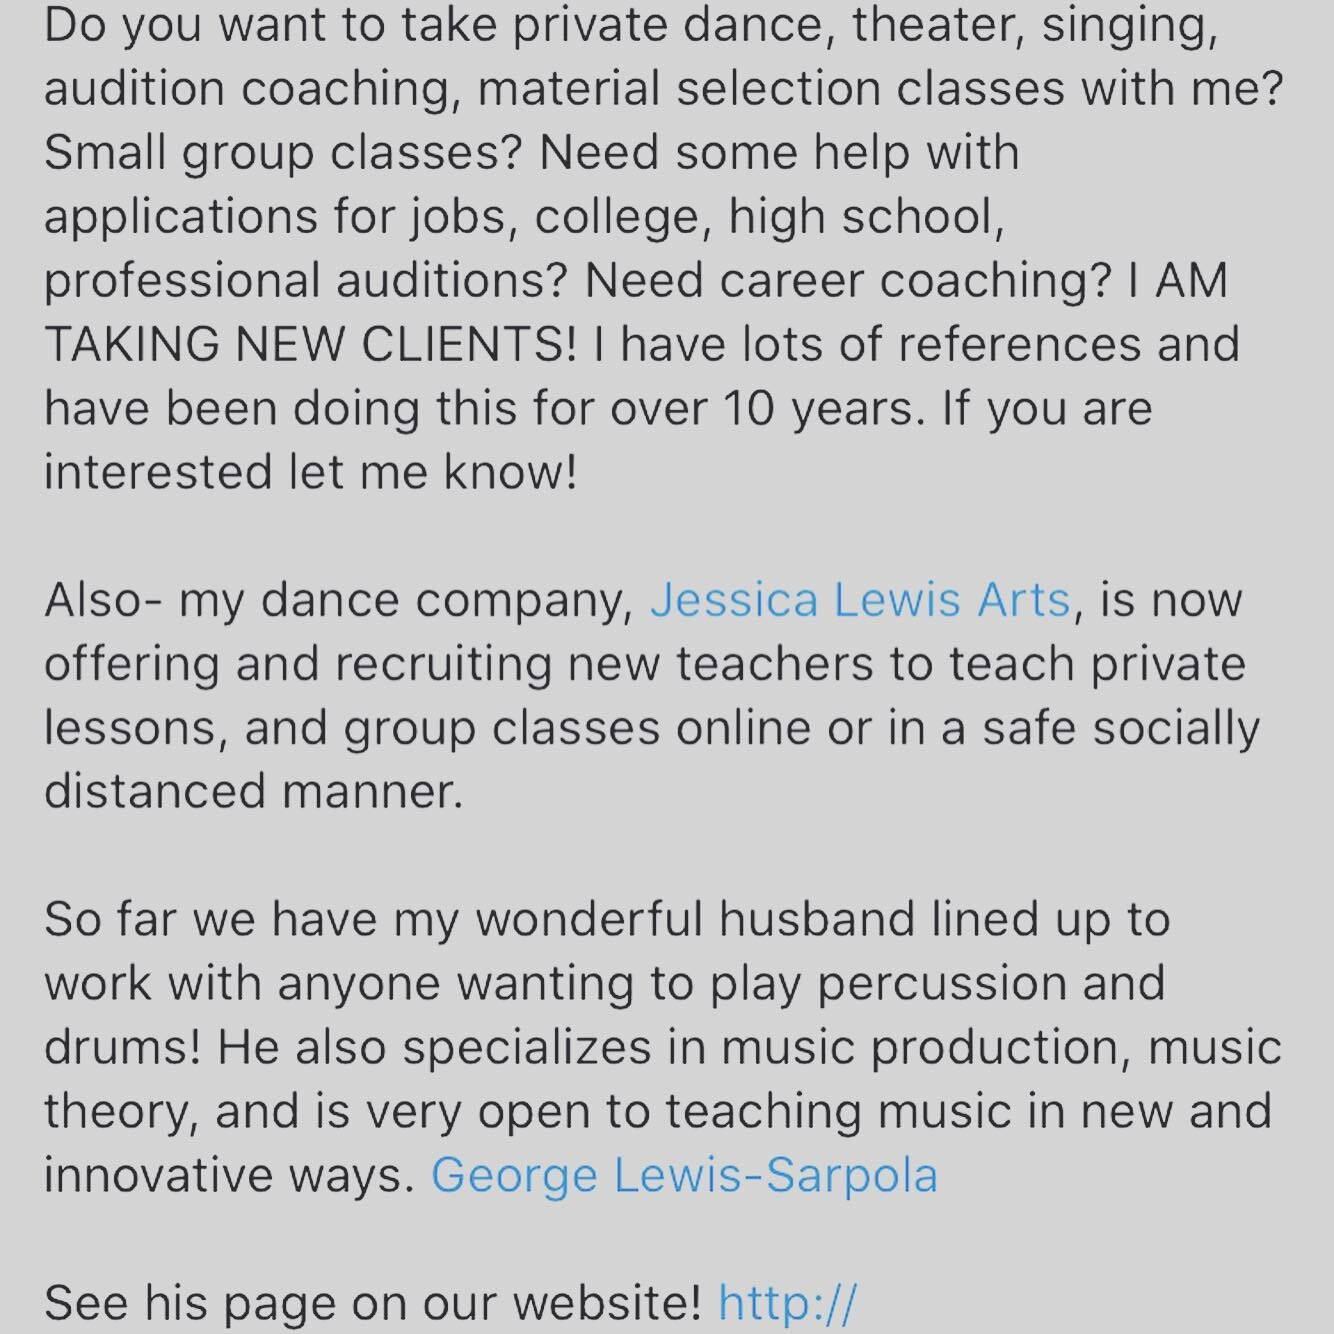 Do you want to take private dance, theater, singing, audition coaching, material selection classes with me? Small group classes? Need some help with applications for jobs, college, high school, professional auditions? Need career coaching? We are TAK